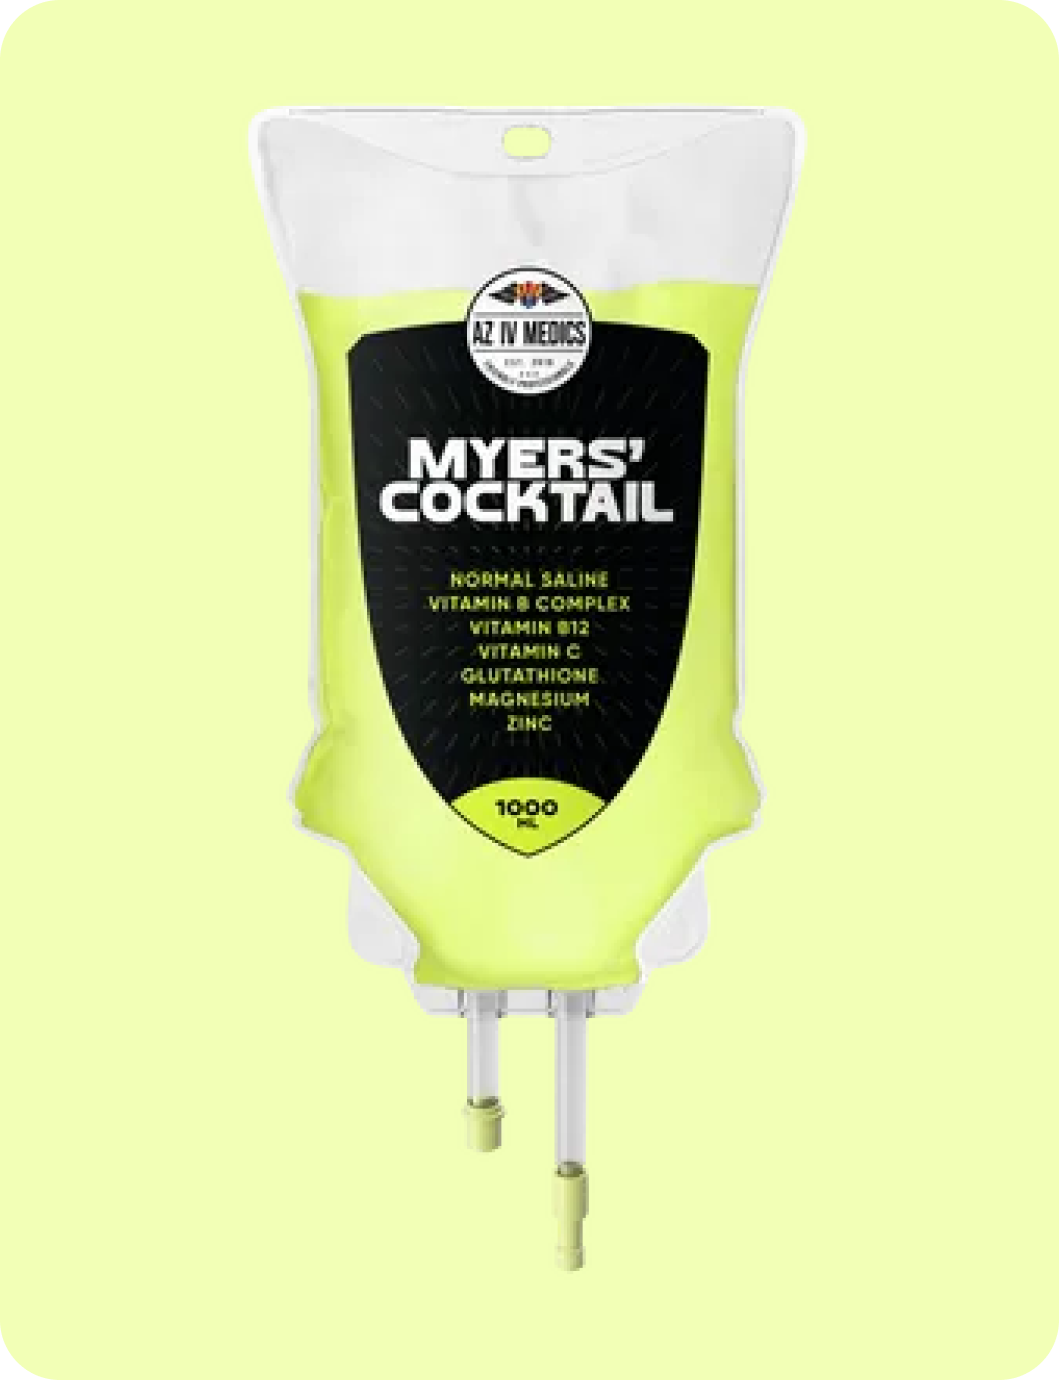 A bag of myers ' cocktail on a yellow background.